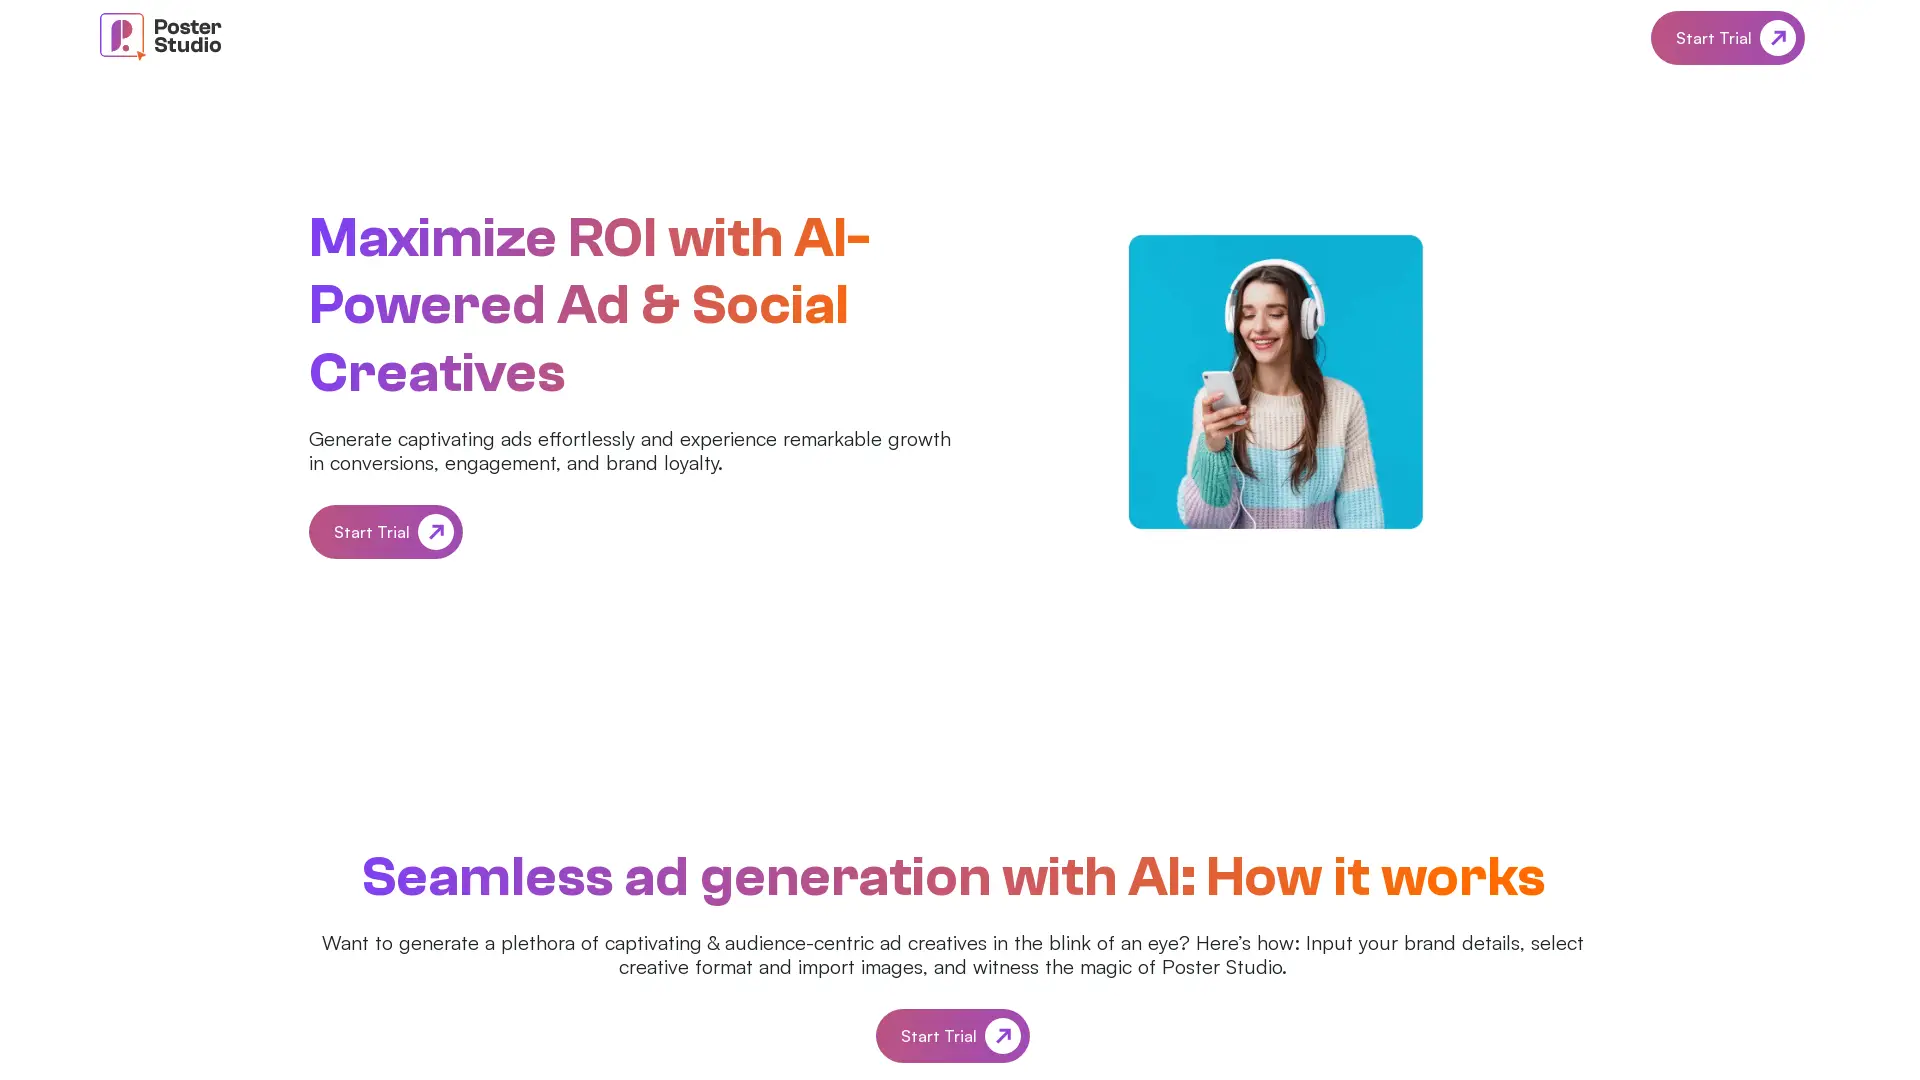 11 Best AI Tools for Digital Marketing and Ad Creation